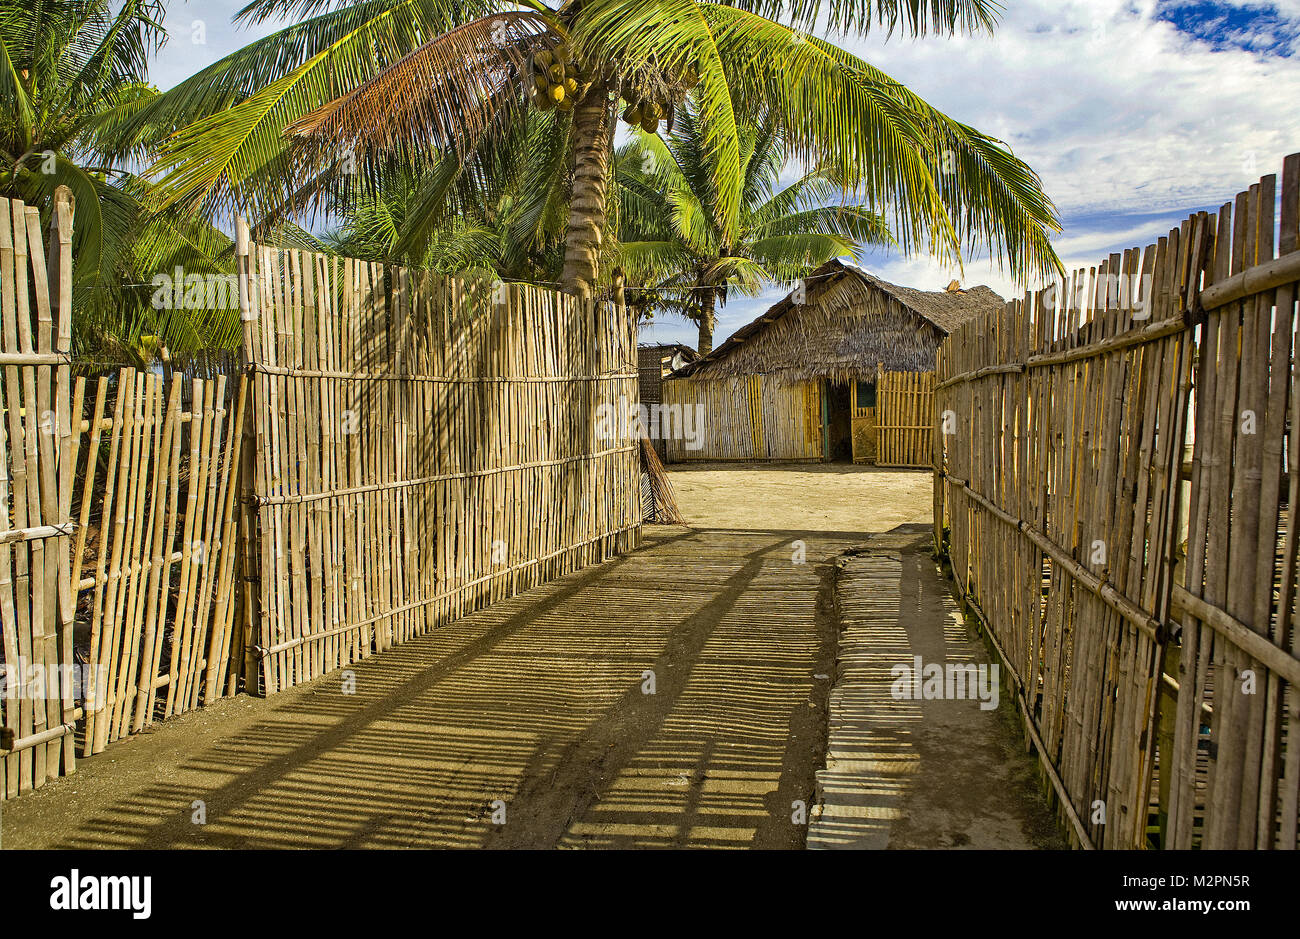 Scenic still life of a fence and small, simple home all made of native bush materials - bamboo and coconut fronds. Stock Photo